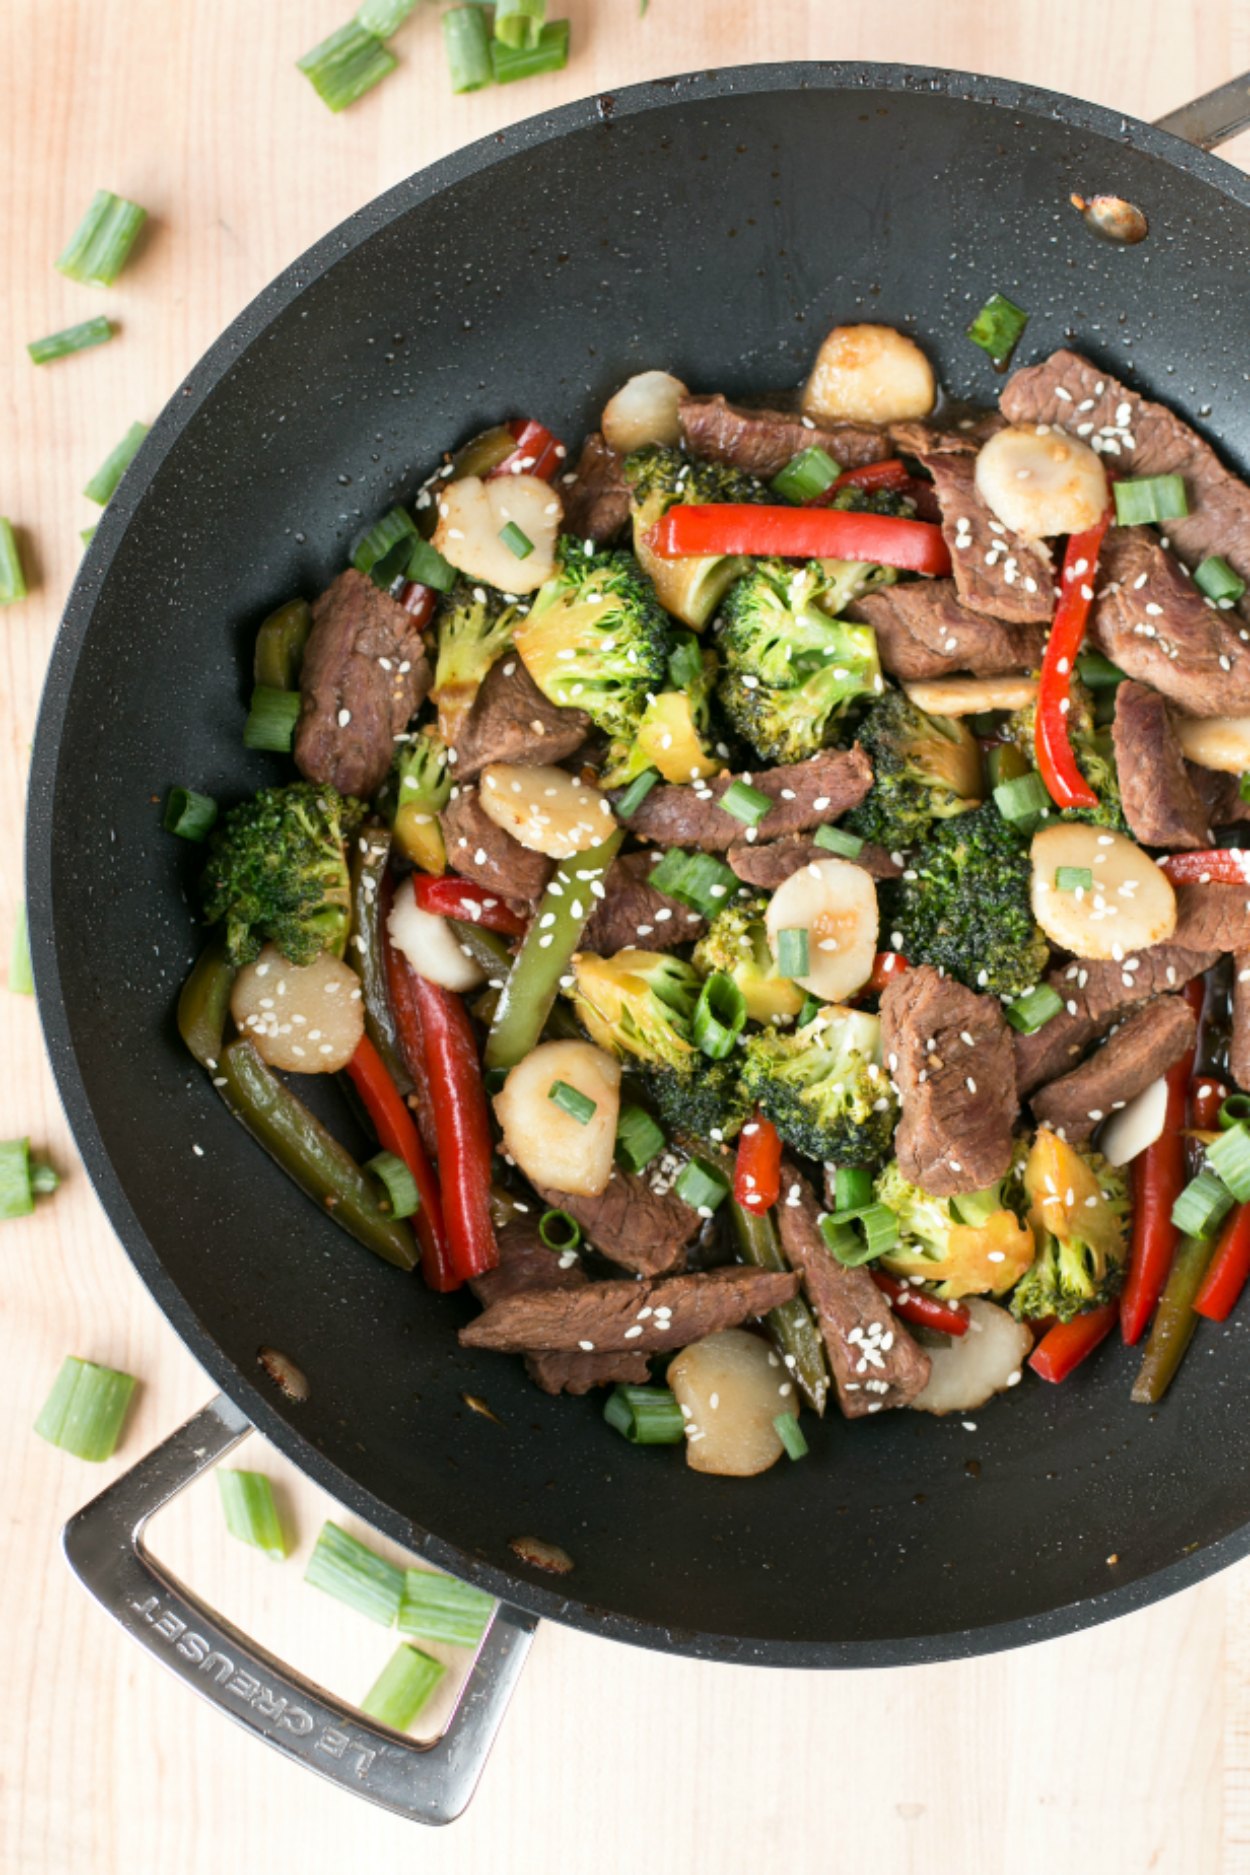 A large wok filled with beef stir fry and vegetables that is sitting on a wooden surface